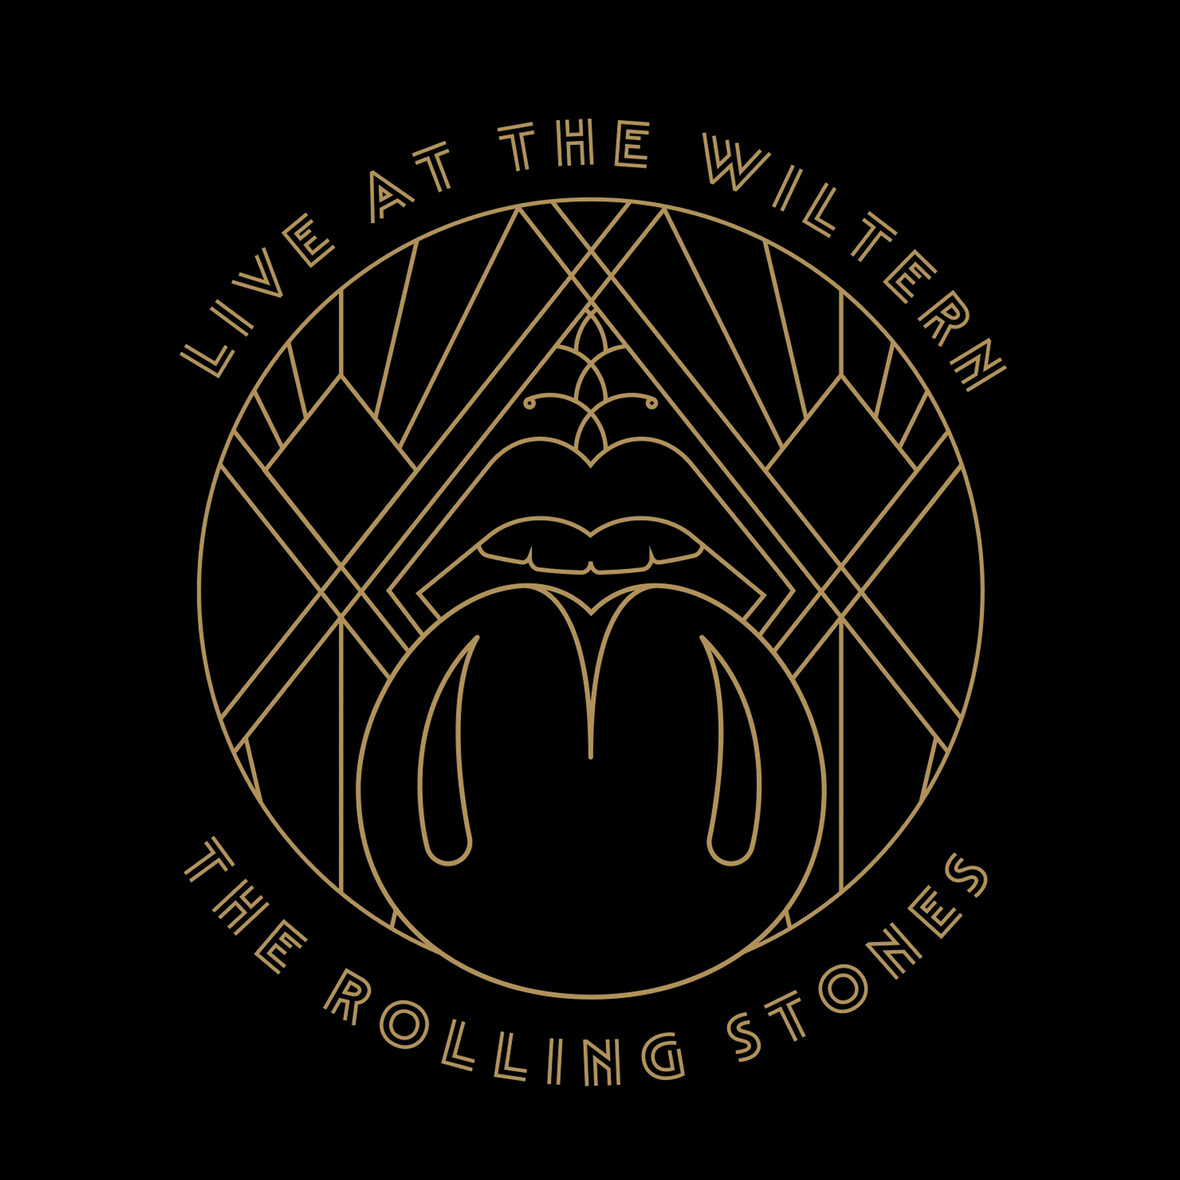 THE ROLLING STONES LIVE AT THE WILTERN Out On Multiple Formats March 8